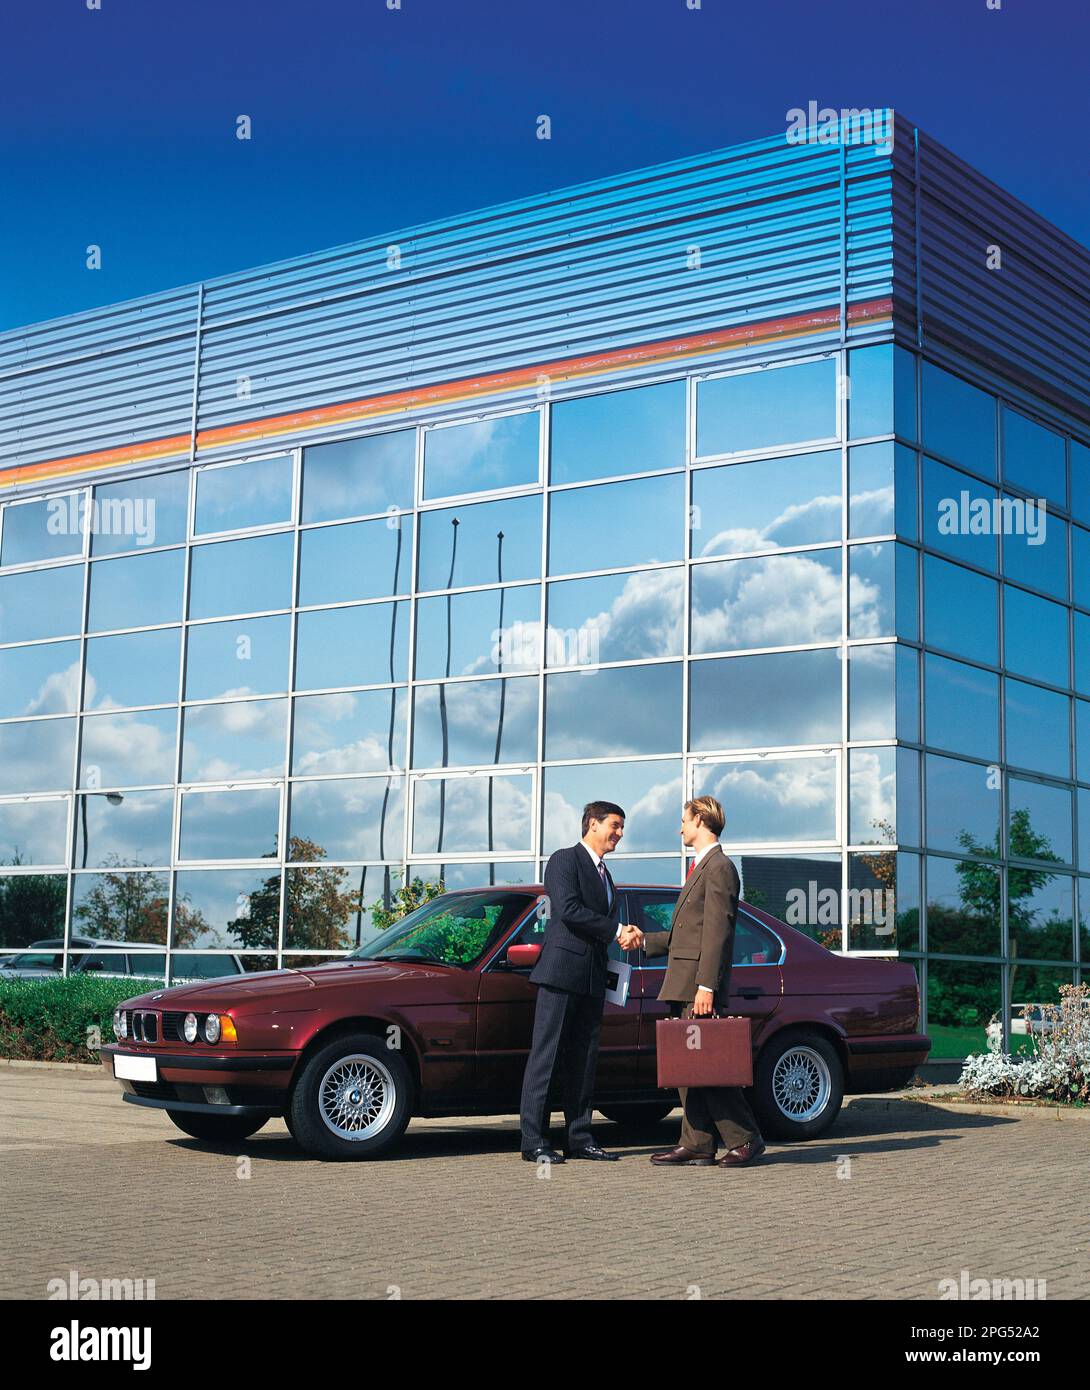 Business executives standing outside modern commercial building with vintage BMW car. Stock Photo